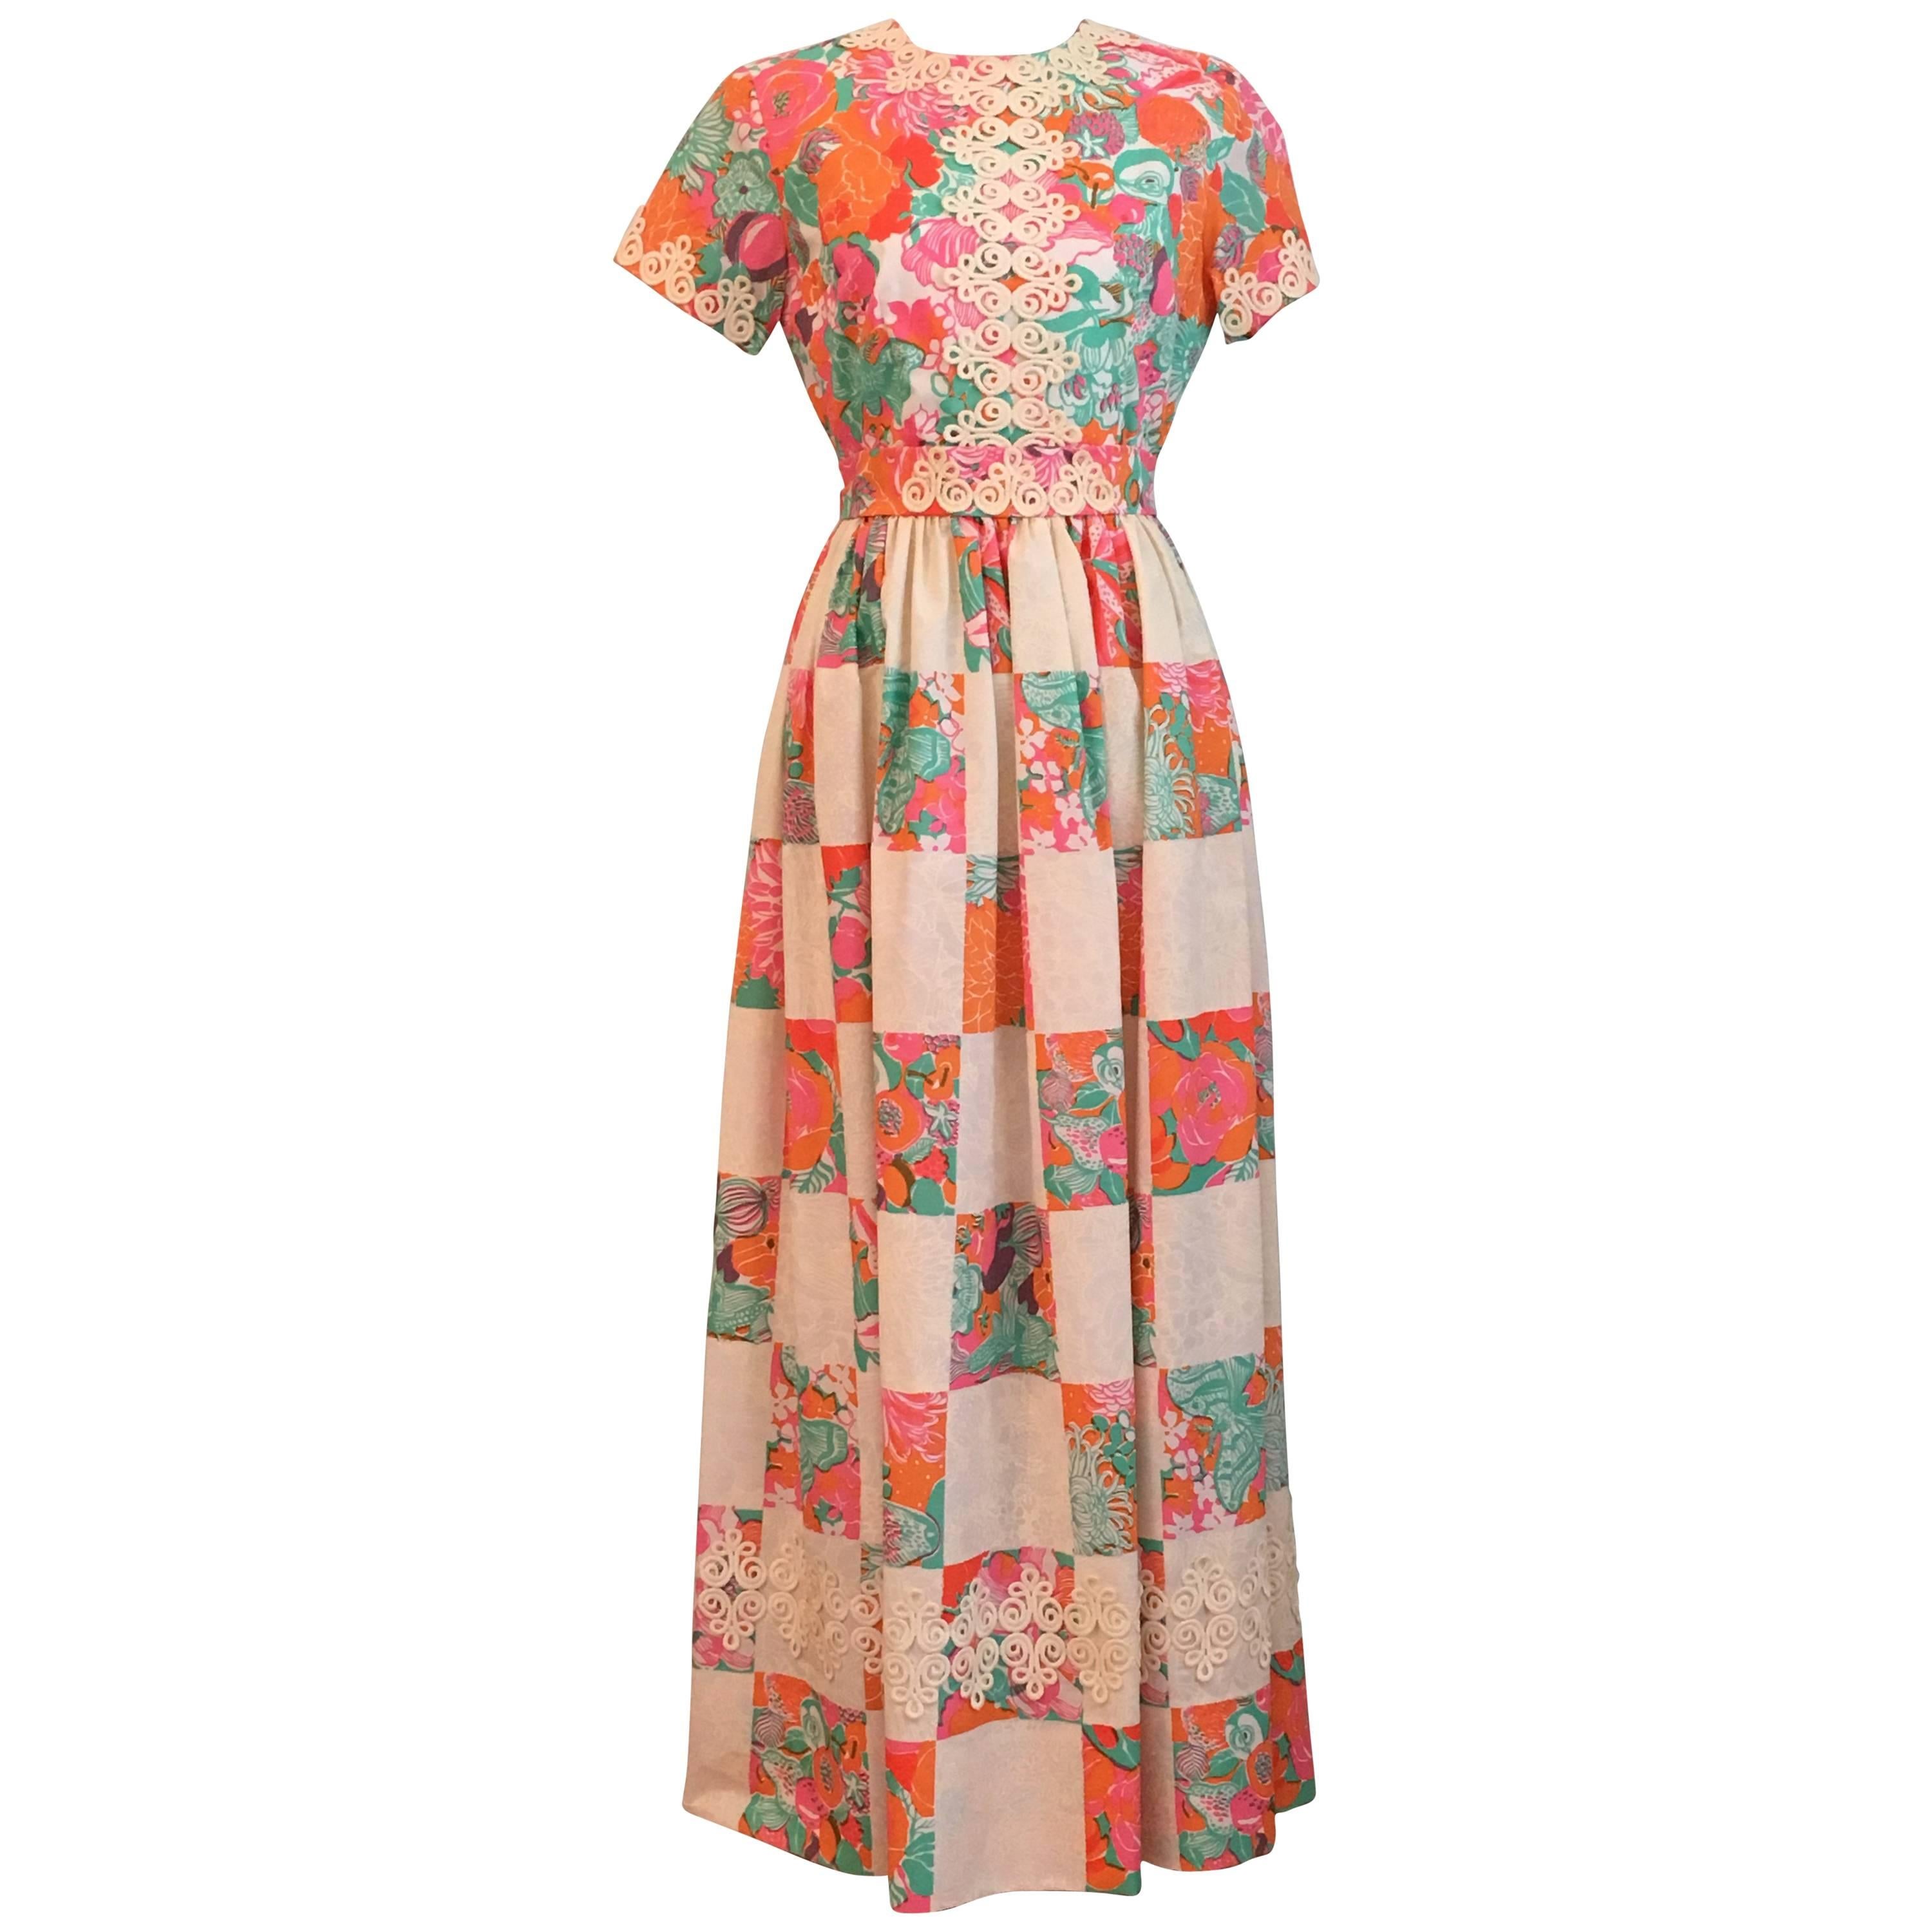 1960s Lilly Pulitzer Maxi Dress with Patchwork Print Skirt For Sale